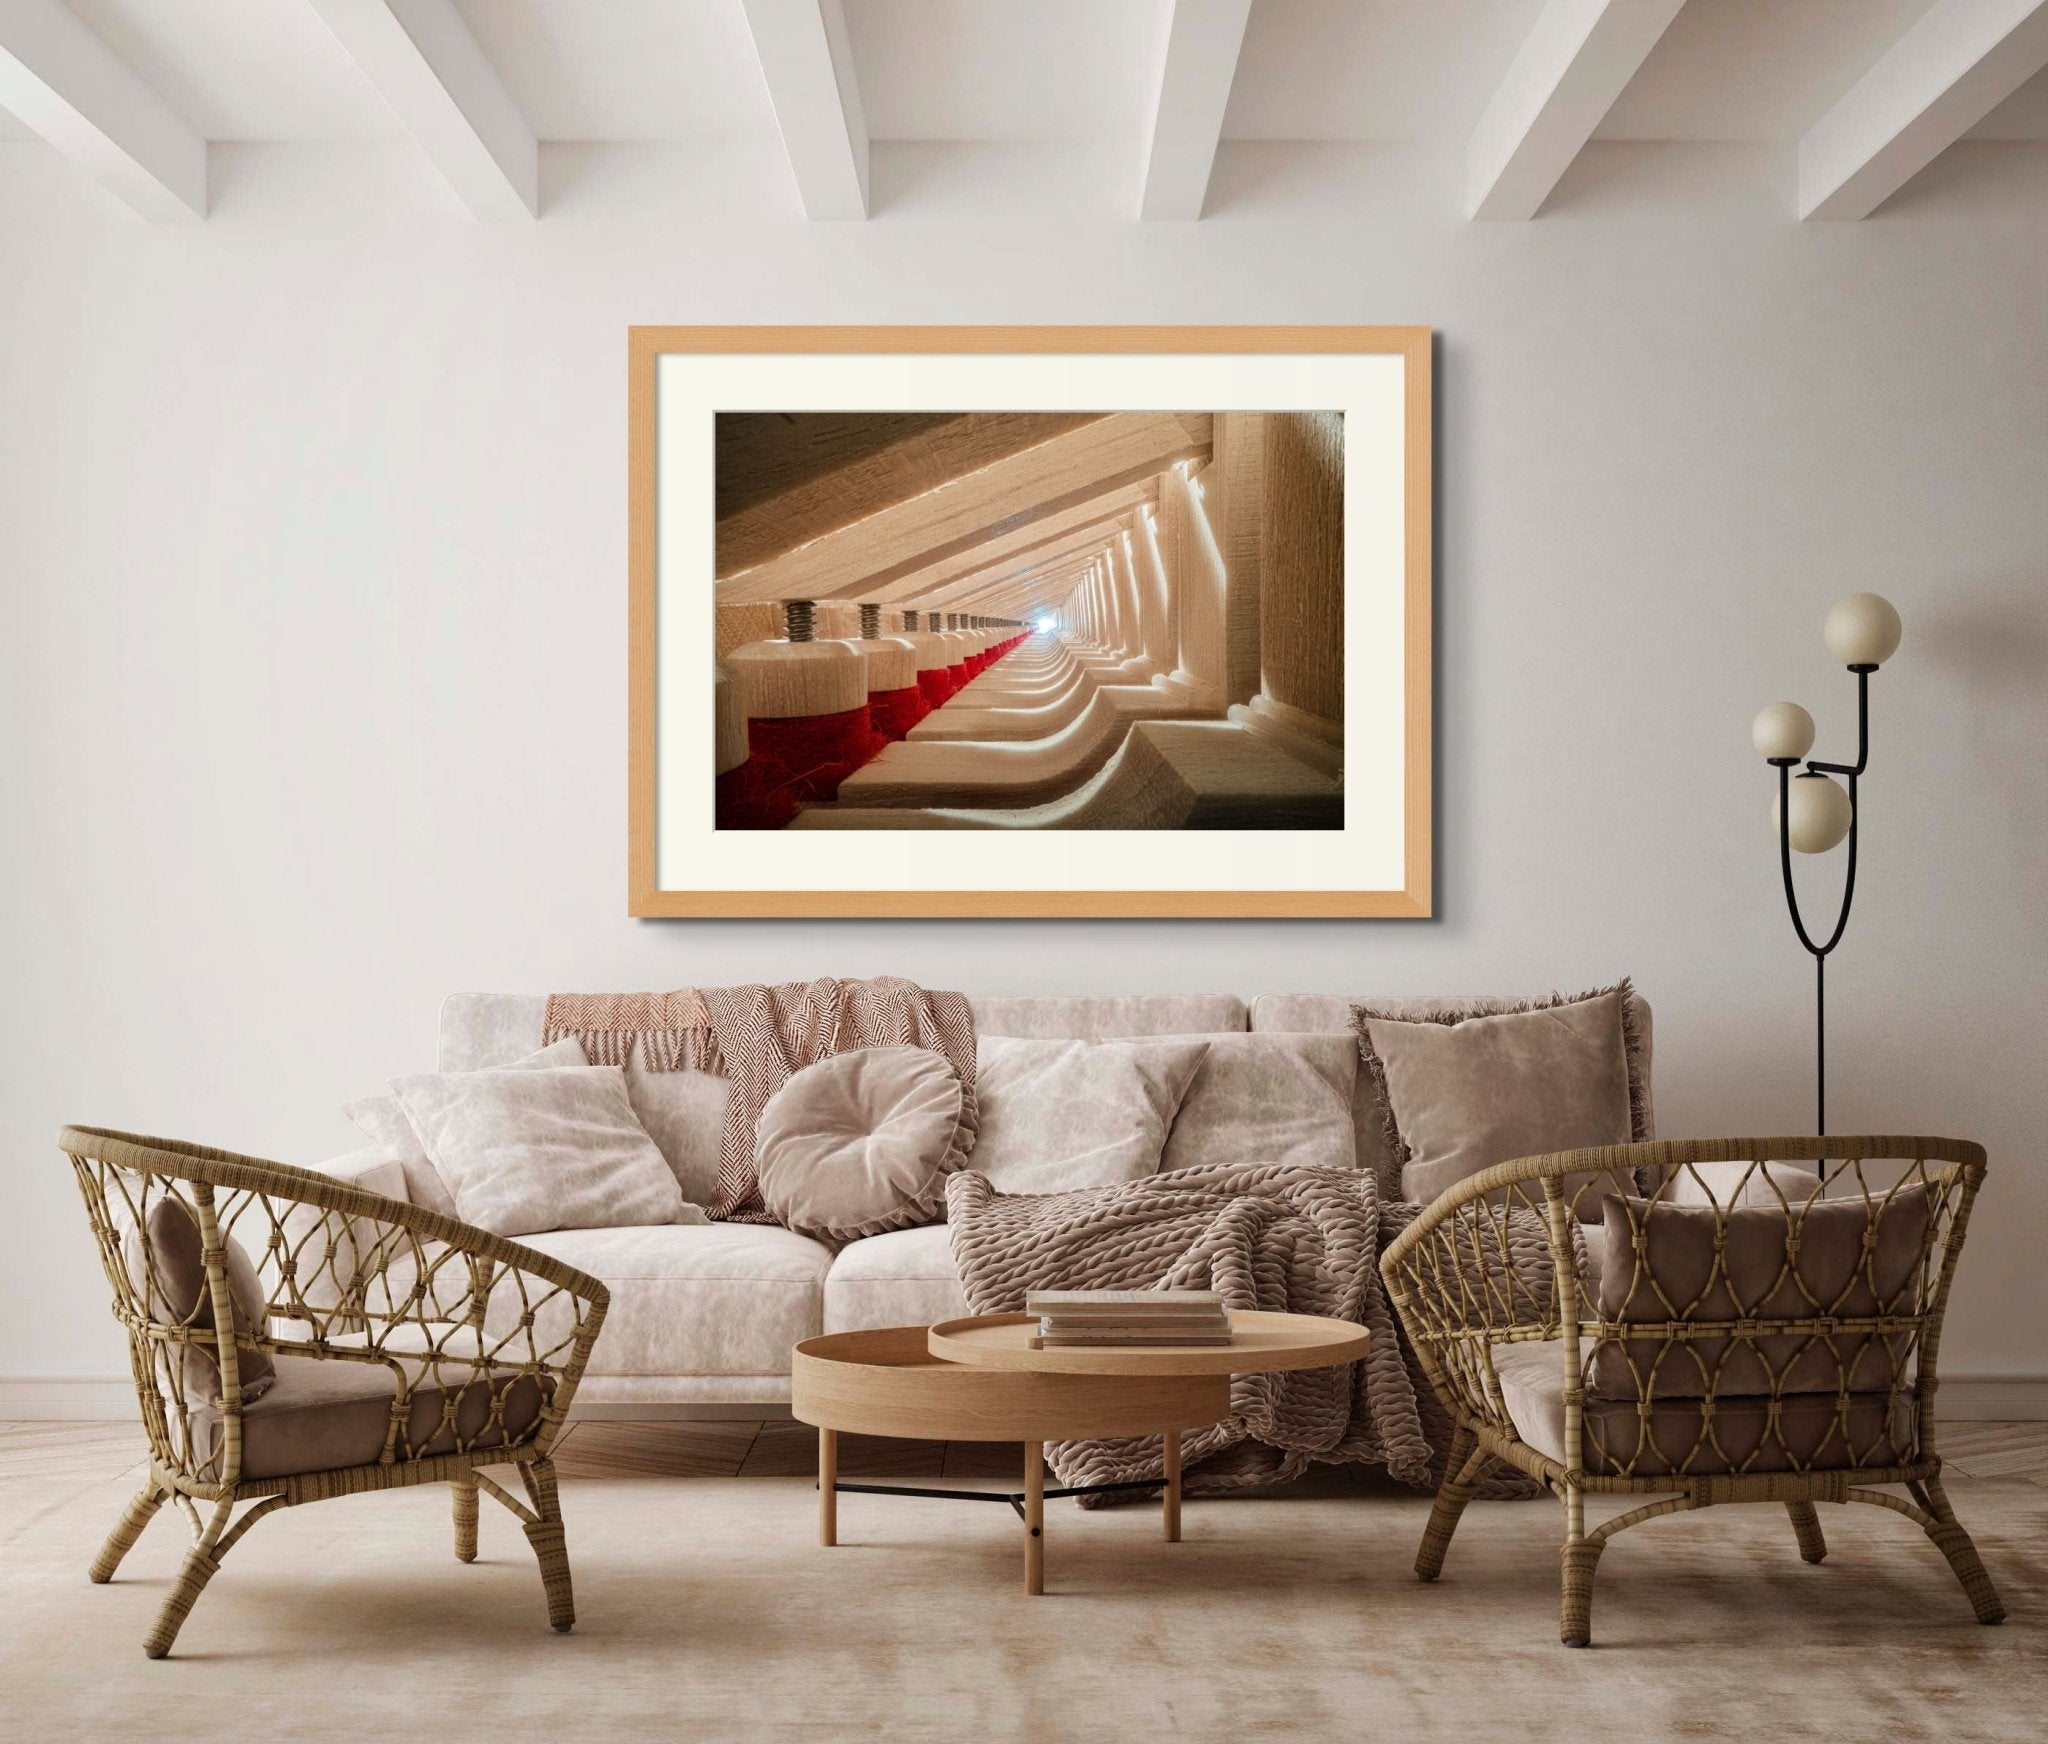 Photo of Fazioli Grand Piano Part 1. Signed Limited Edition Museum Quality Print. - Giclée Museum Quality Print - Architecture In Music